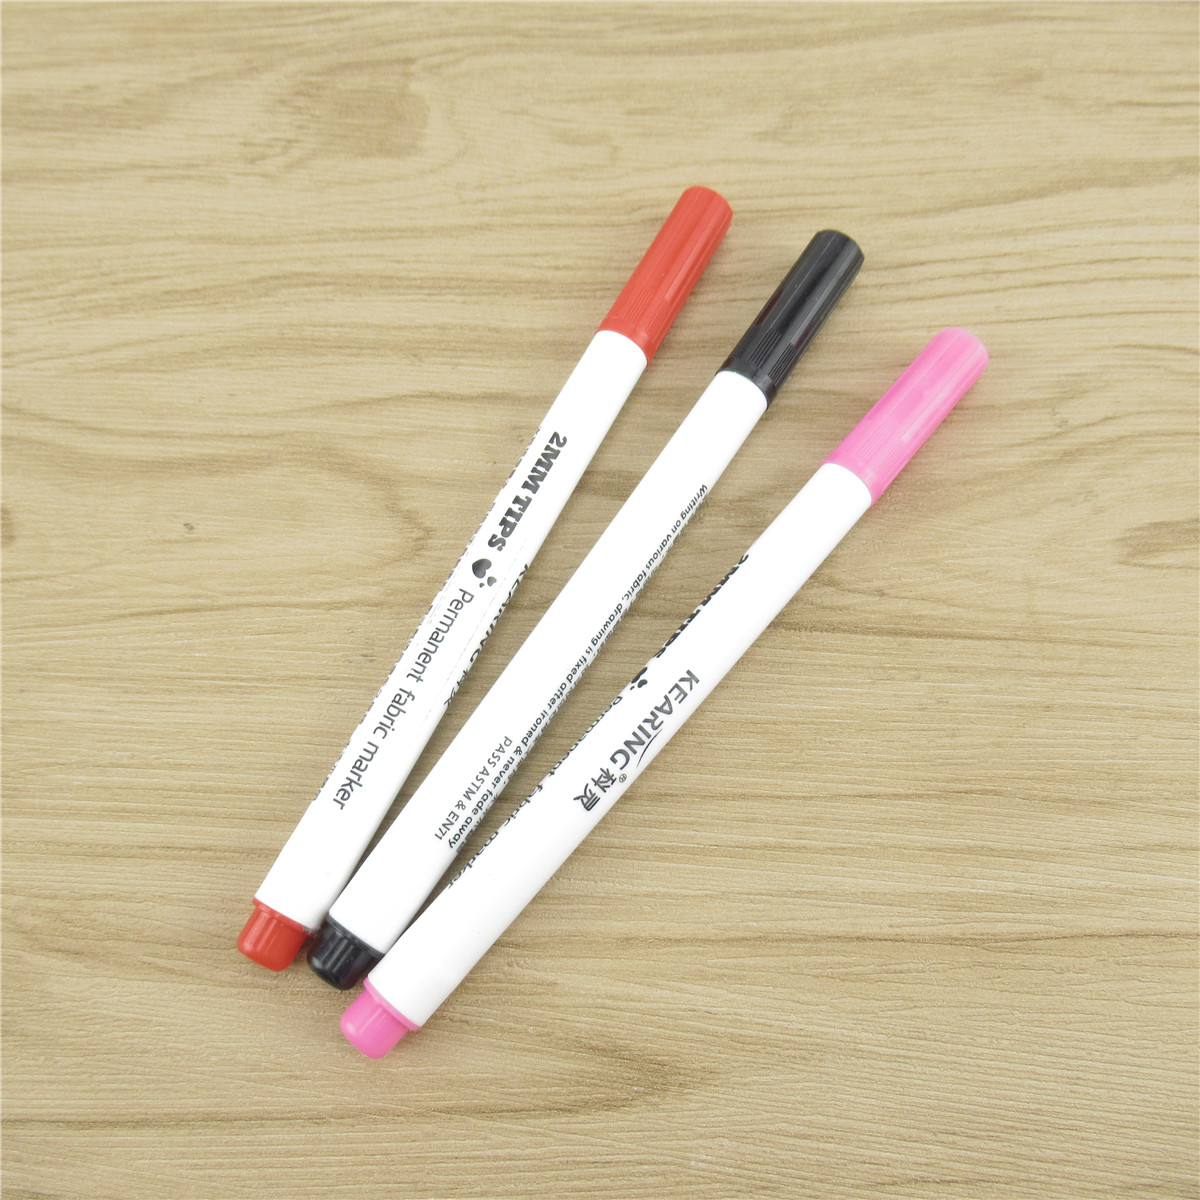 Washable Fabric Marker Pen For T-shirts/shoes/caps/tote Bags